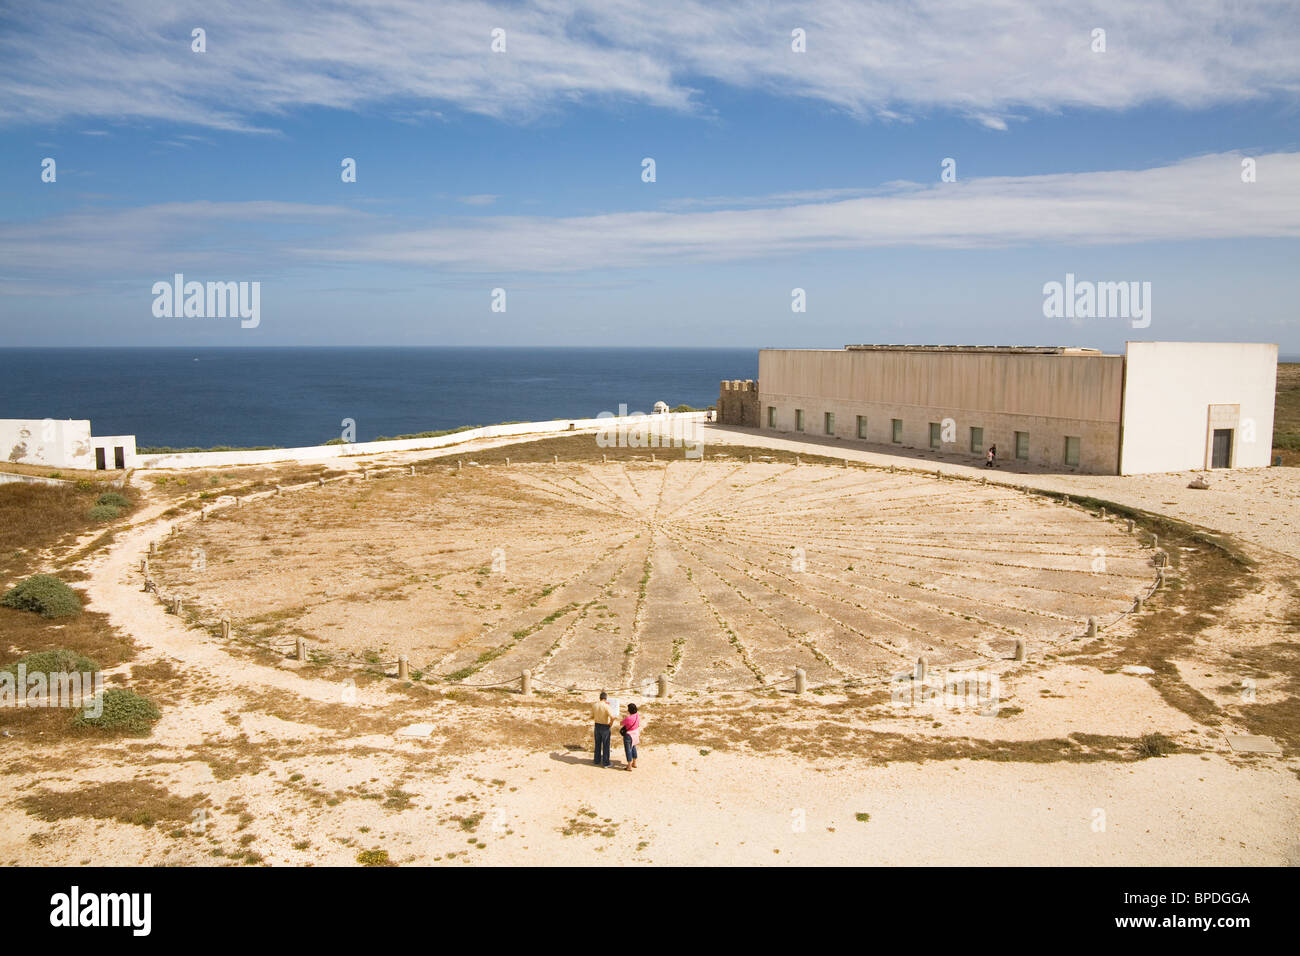 The mysterious 'Compass Rose' or 'Rosa dos Vertos' at Sagres on the Algarve in Portugal. Stock Photo